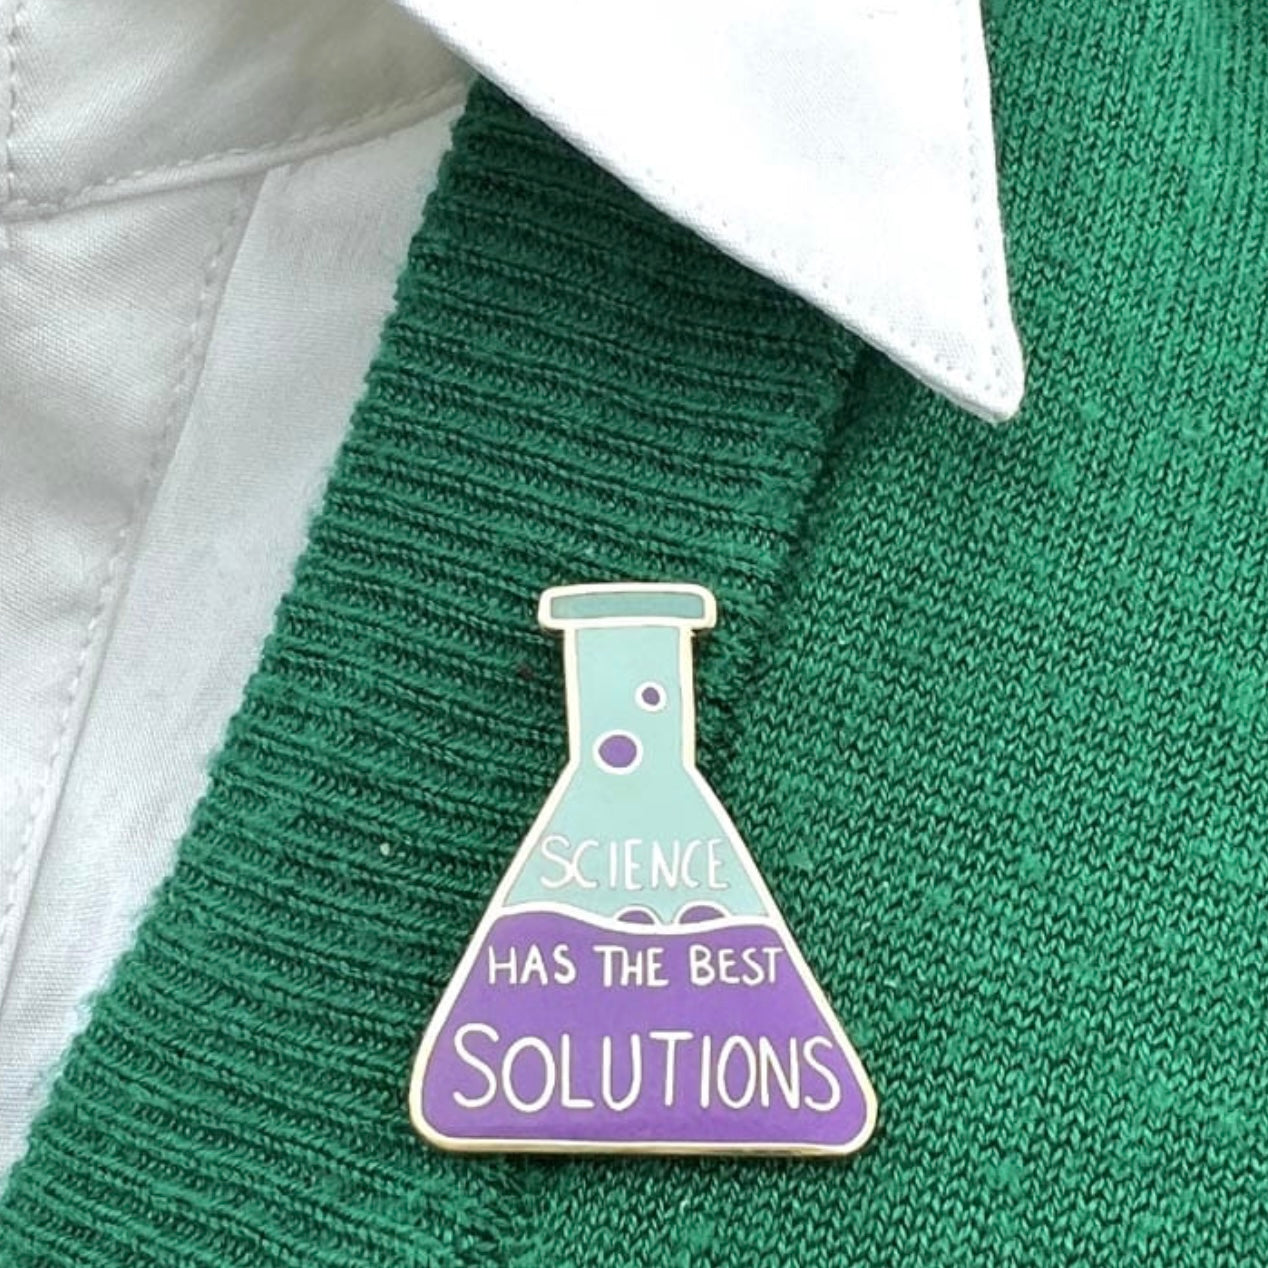 Jubly-Umph Lapel Pin Science Has The Best Solutions